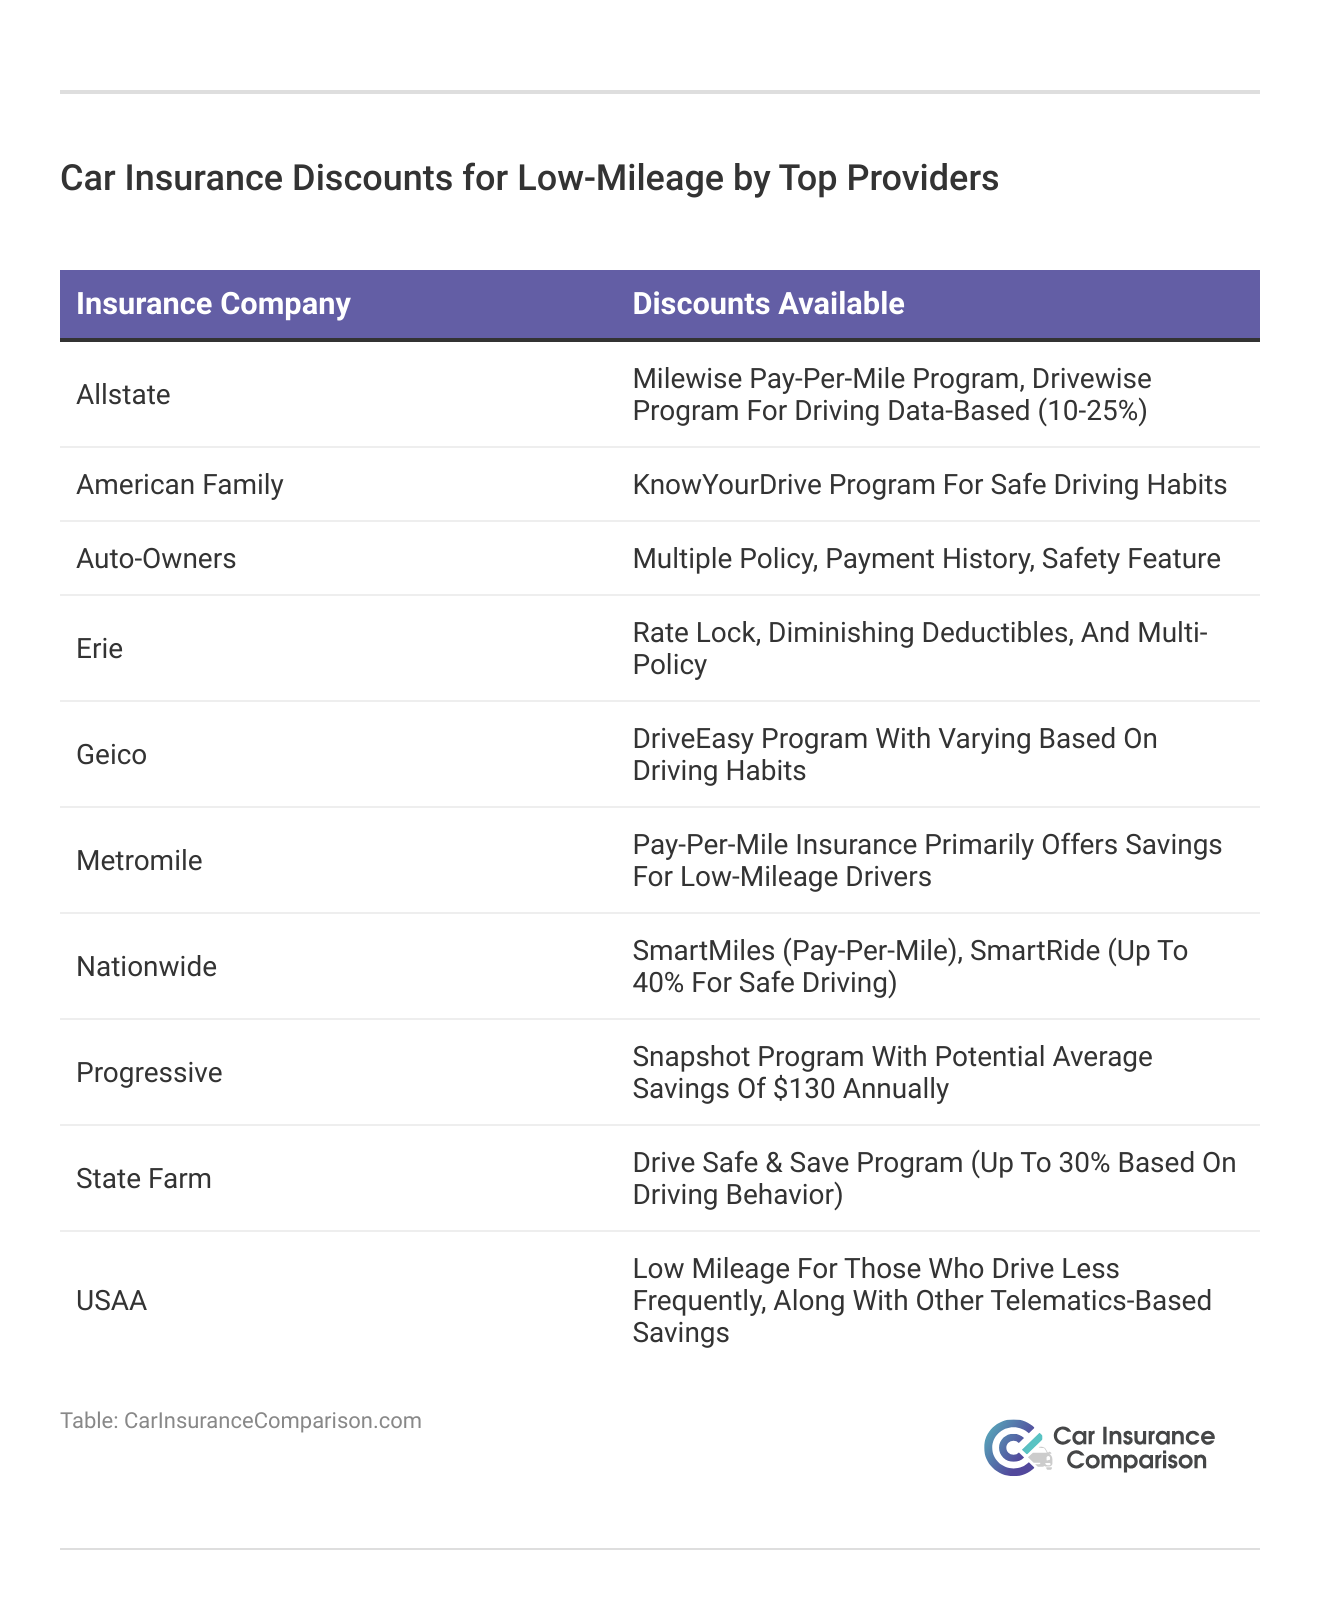 <h3>Car Insurance Discounts for Low-Mileage by Top Providers<h3>